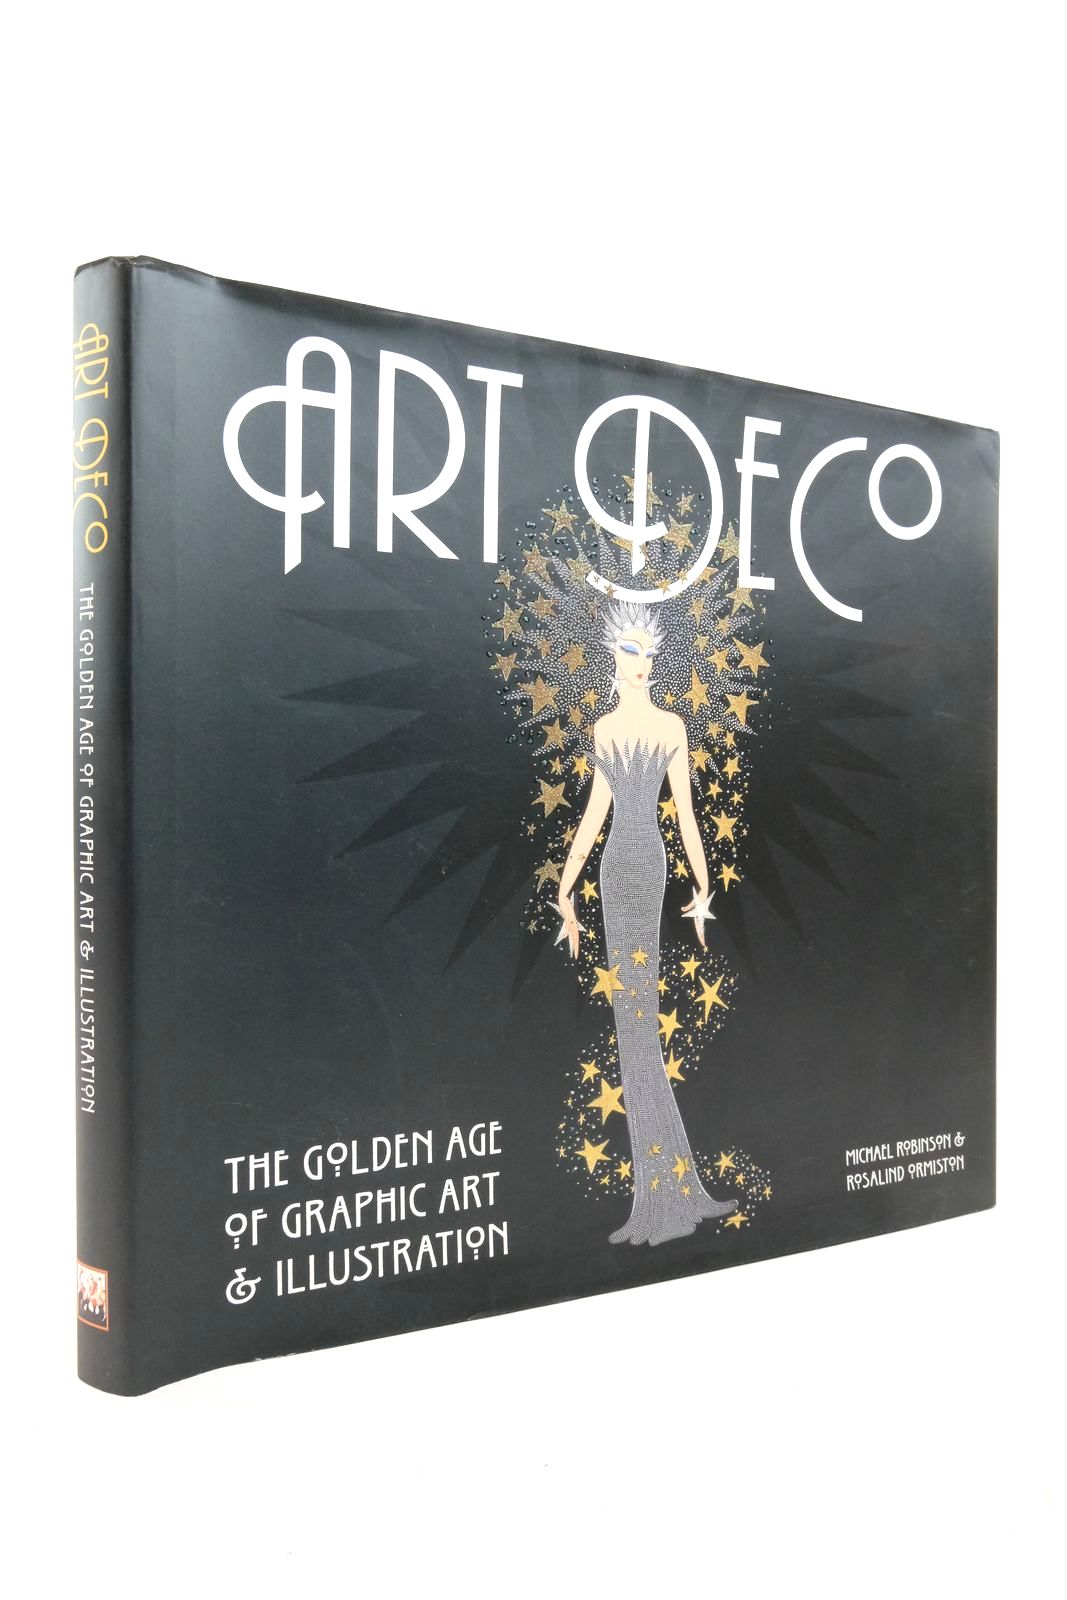 Photo of ART DECO THE GOLDEN AGE OF GRAPHIC ART &amp; ILLUSTRATION written by Robinson, Michael Ormiston, Rosalind published by Flame Tree Publishing (STOCK CODE: 2137712)  for sale by Stella & Rose's Books